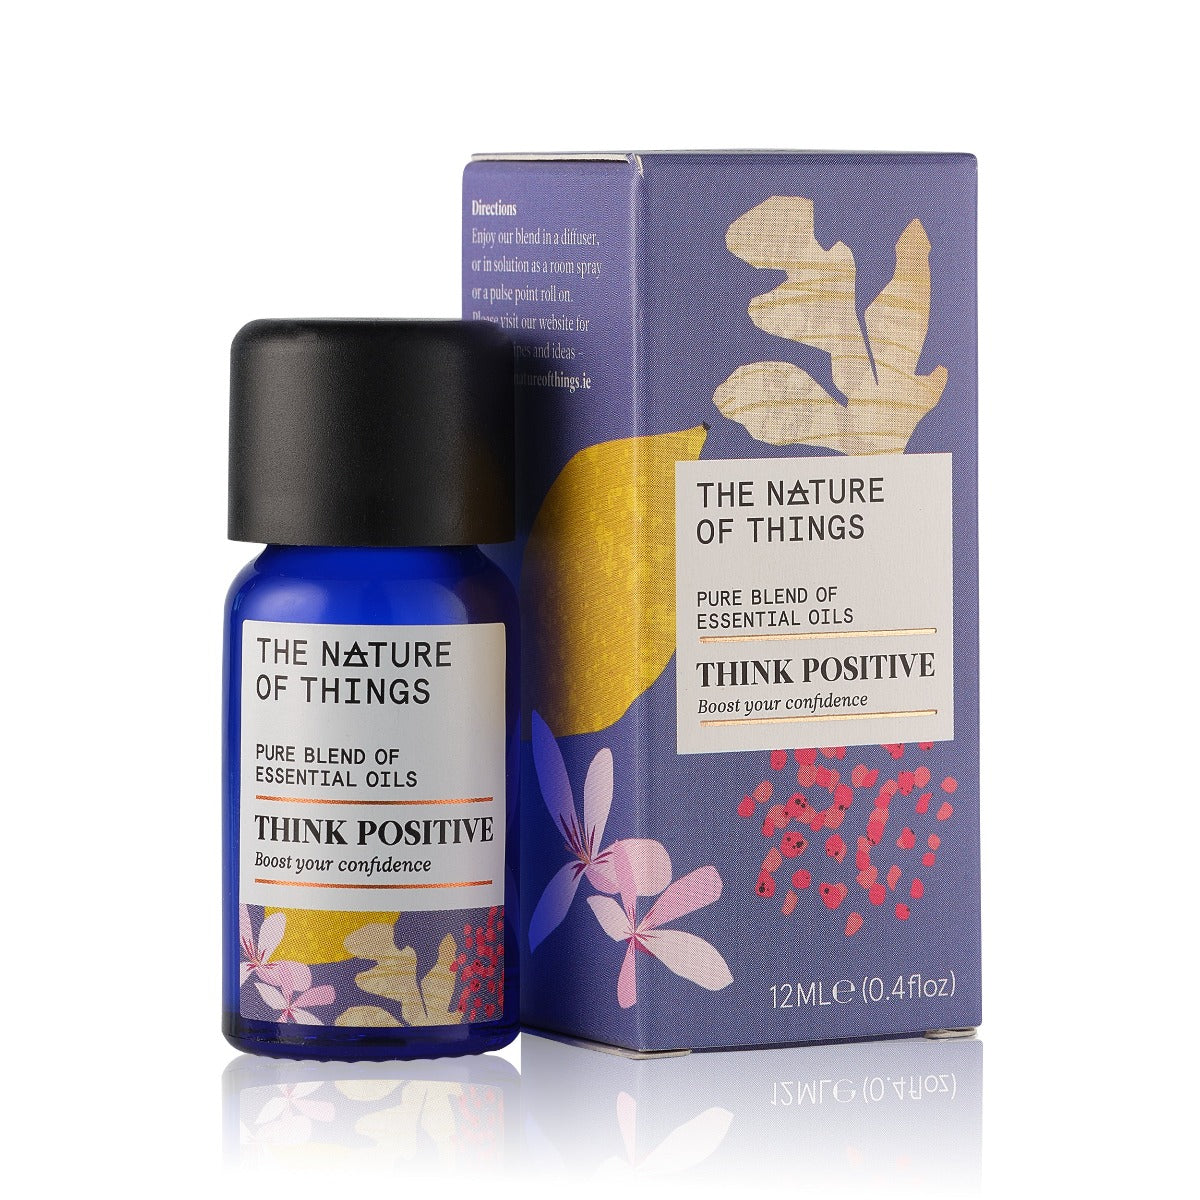 Think Positive Essential Oil Blend from The Nature of Things